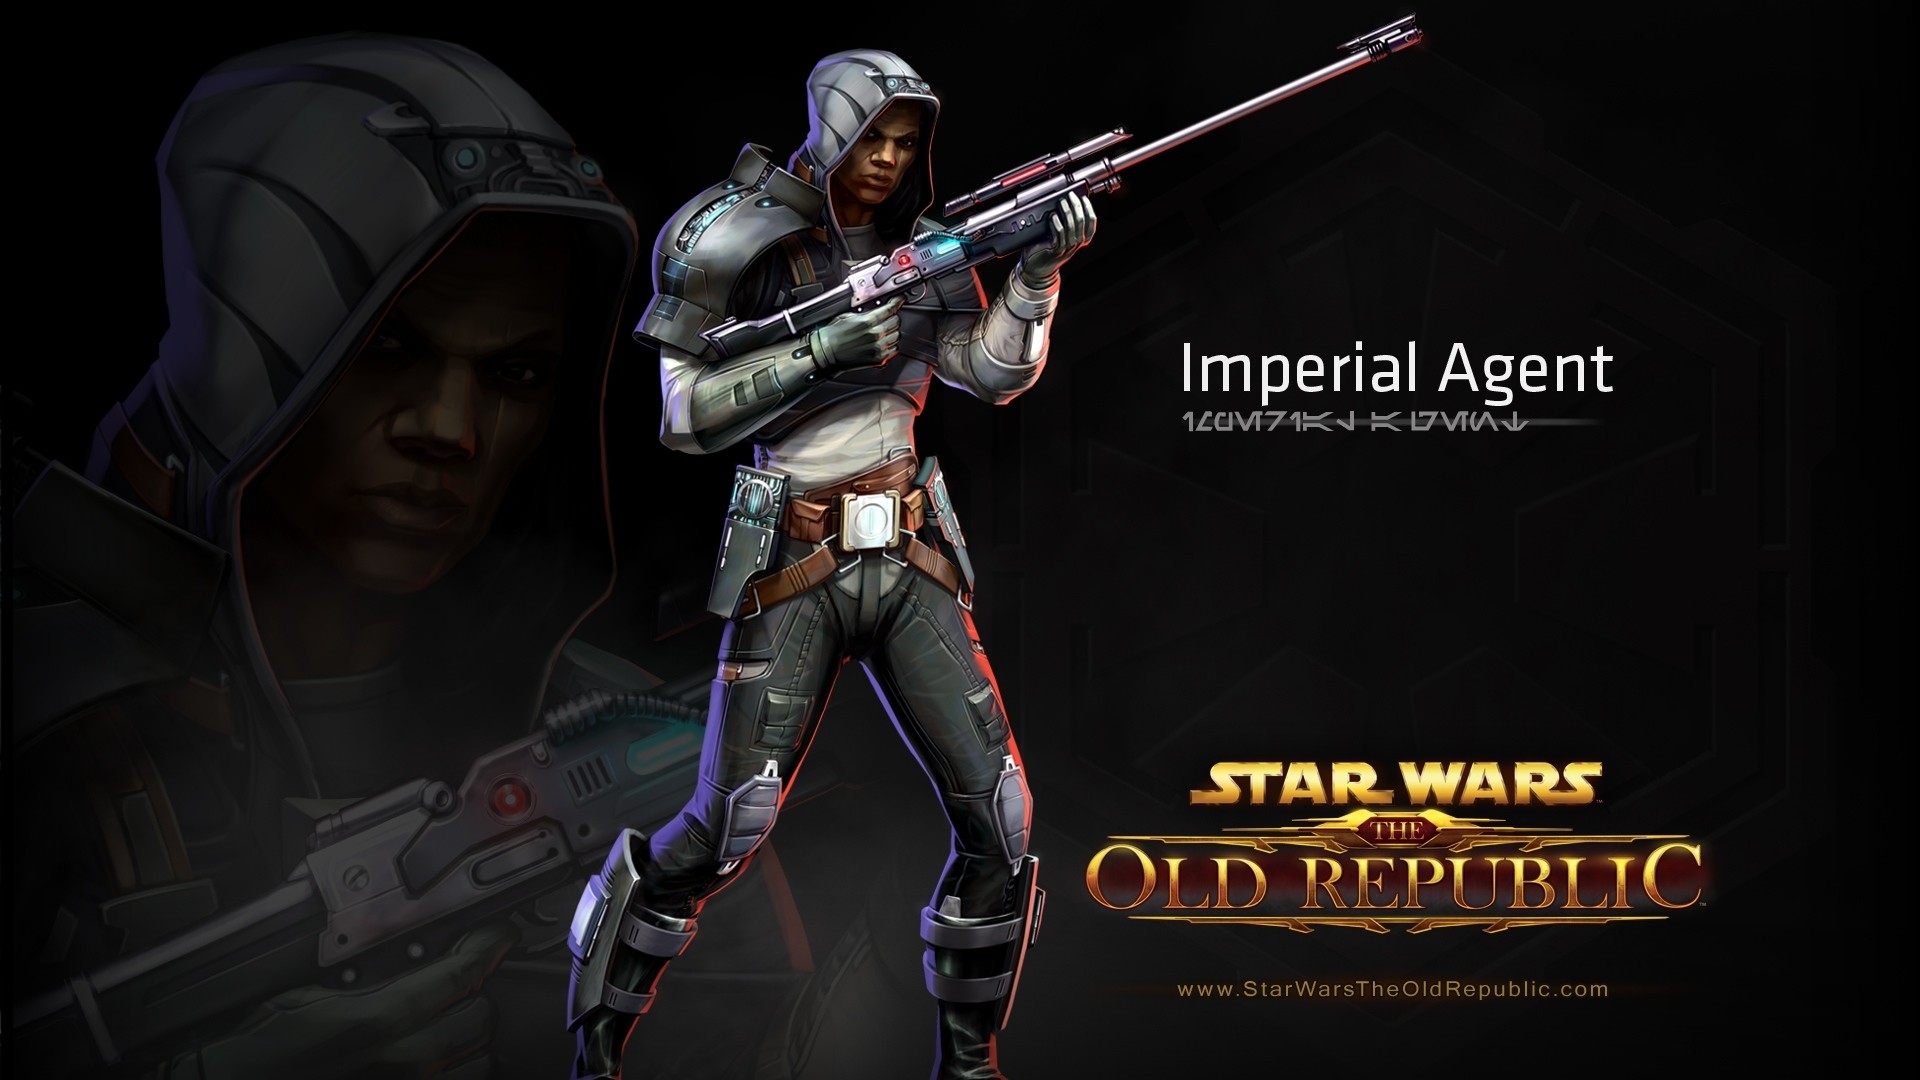 1920x1080  Wallpaper star wars the old republic, imperial agent, character,  gun